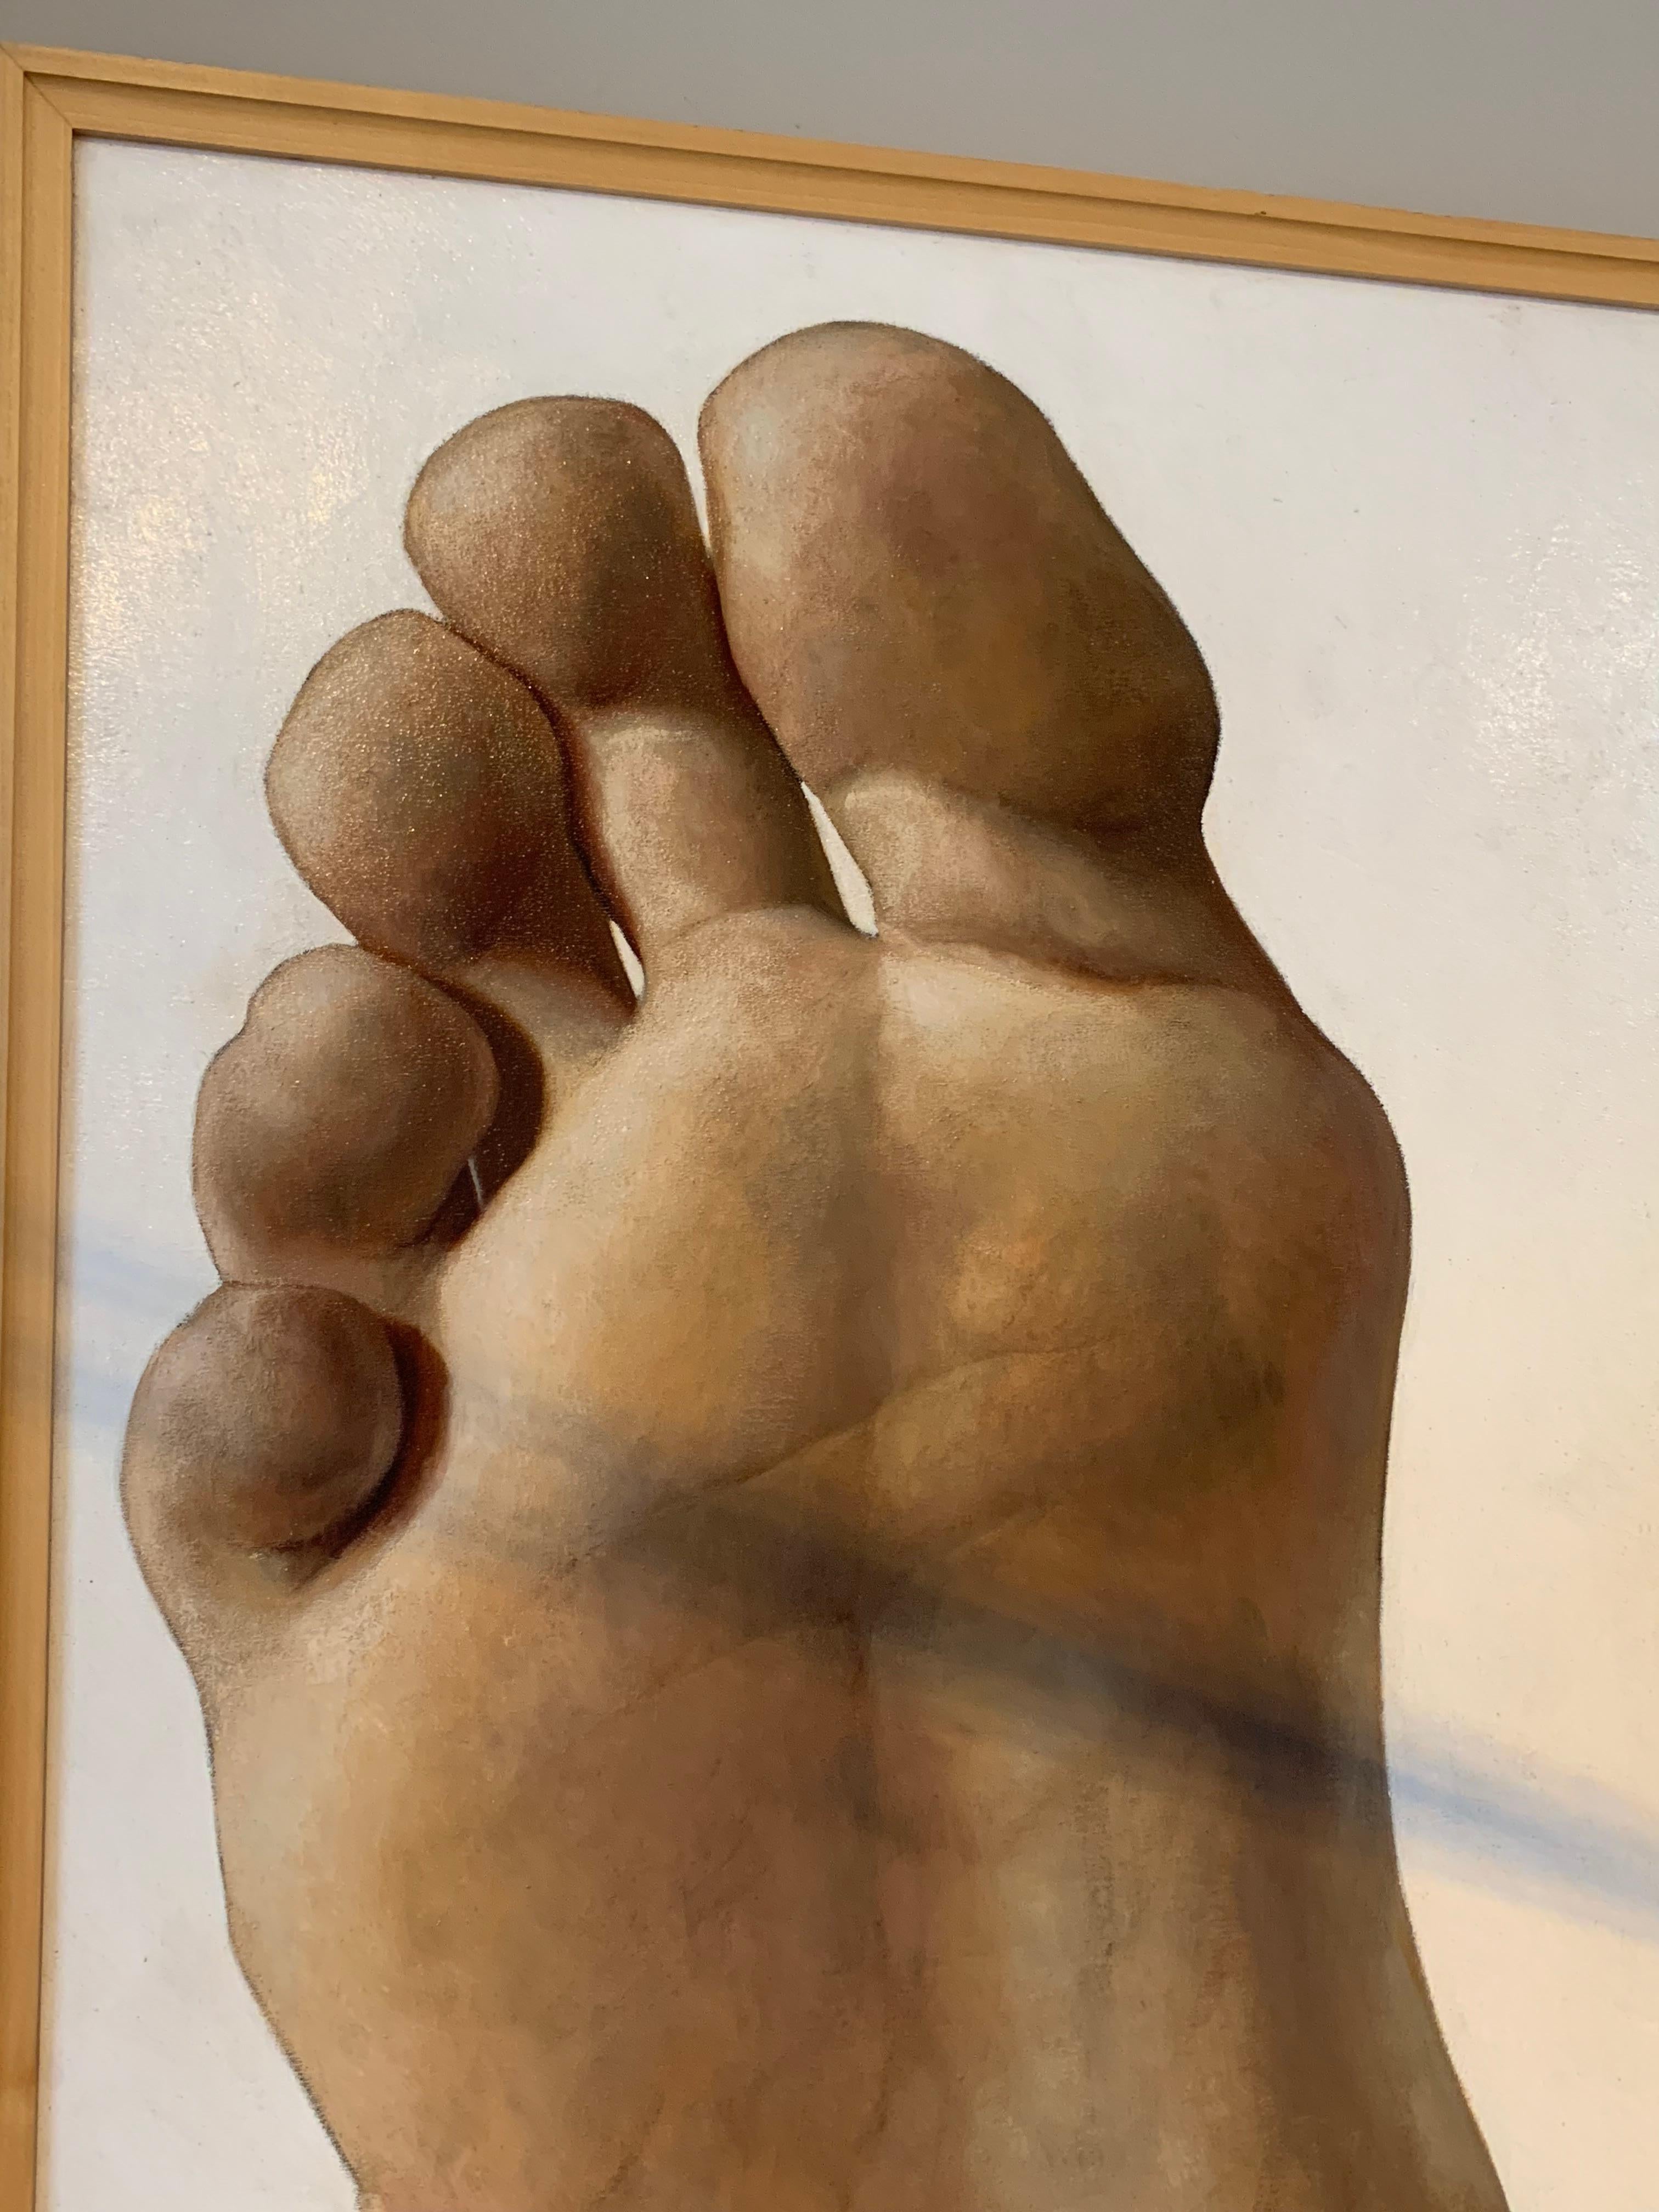 Ackrill’s “Twenty-four inches” a five and half foot-tall diptych of foreshortened feet, which stand alone as fun and funny; he has cropped the figure, leaving the feet a sort of “item to popularize.”  Another thing to note is the environment he